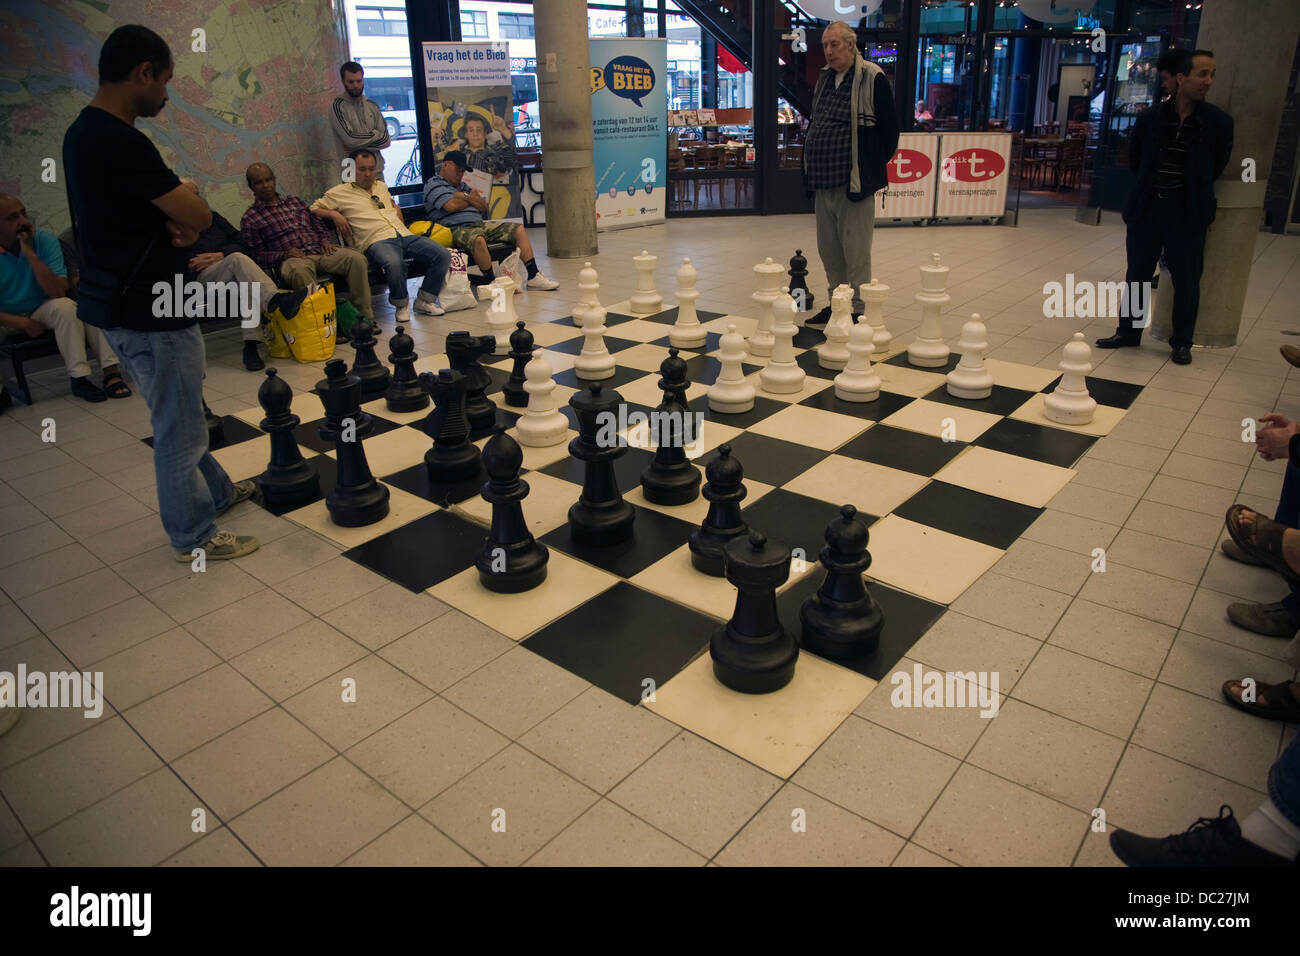 People playing chess with a giant board and pieces in the central library Rotterdam Netherlands Stock Photo